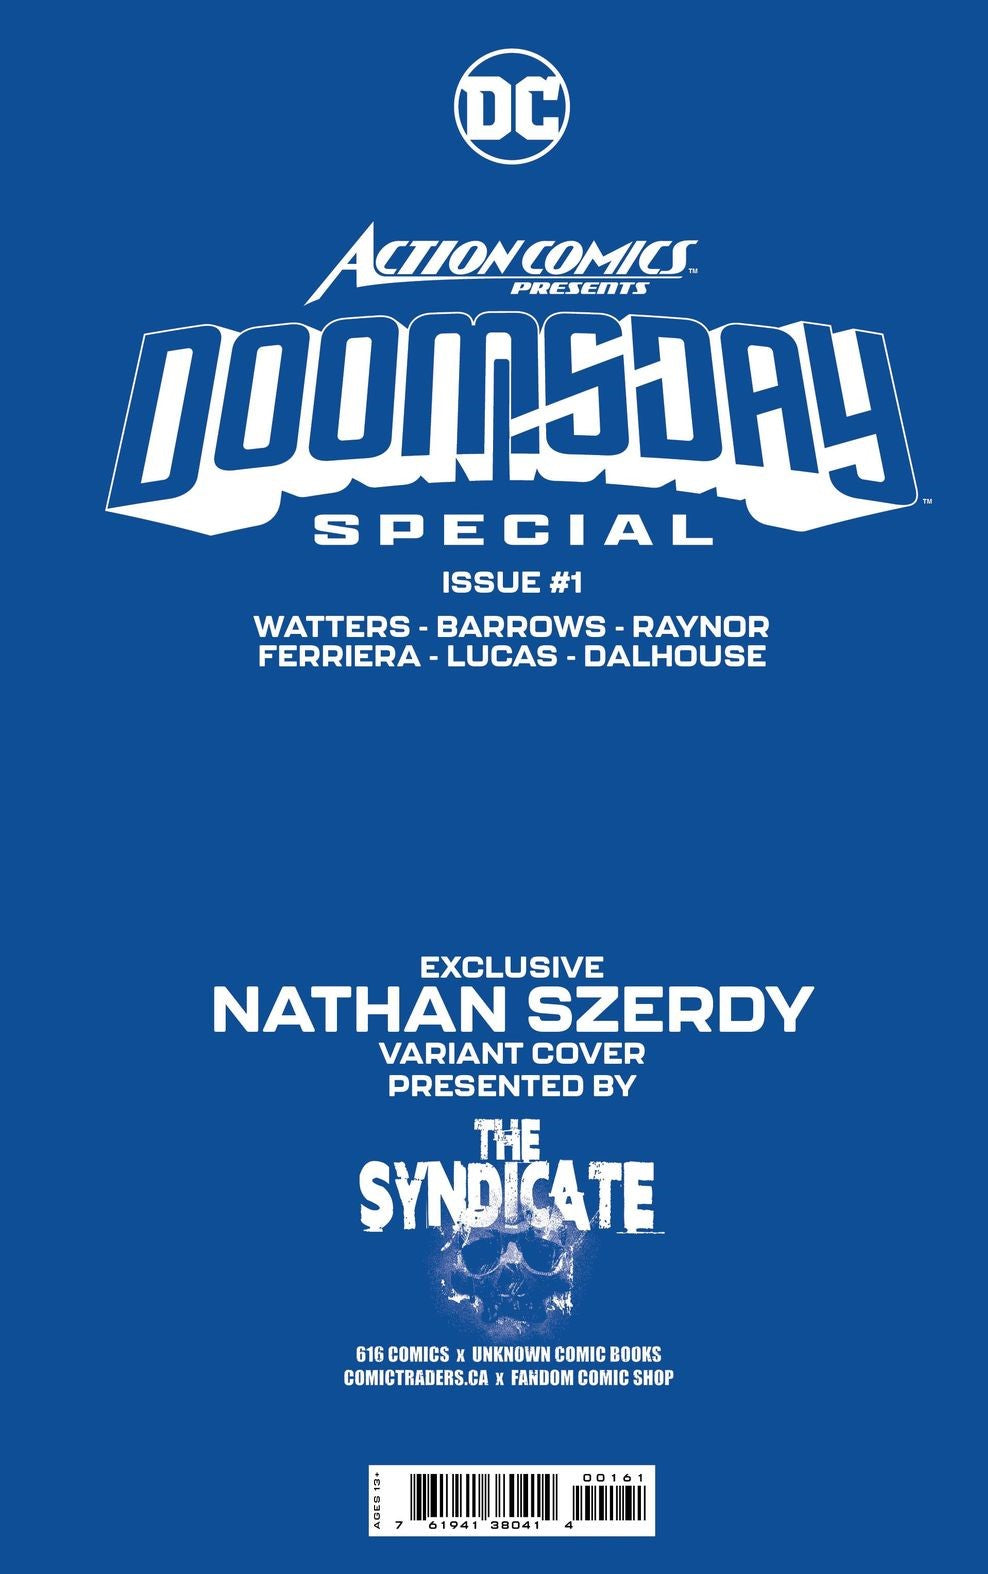 [SIGNED W/ COA] ACTION COMICS PRESENTS DOOMSDAY SPECIAL #1 (ONE SHOT) NATHAN SZERDY (616) EXCLUSIVE VAR (10/11/2023)